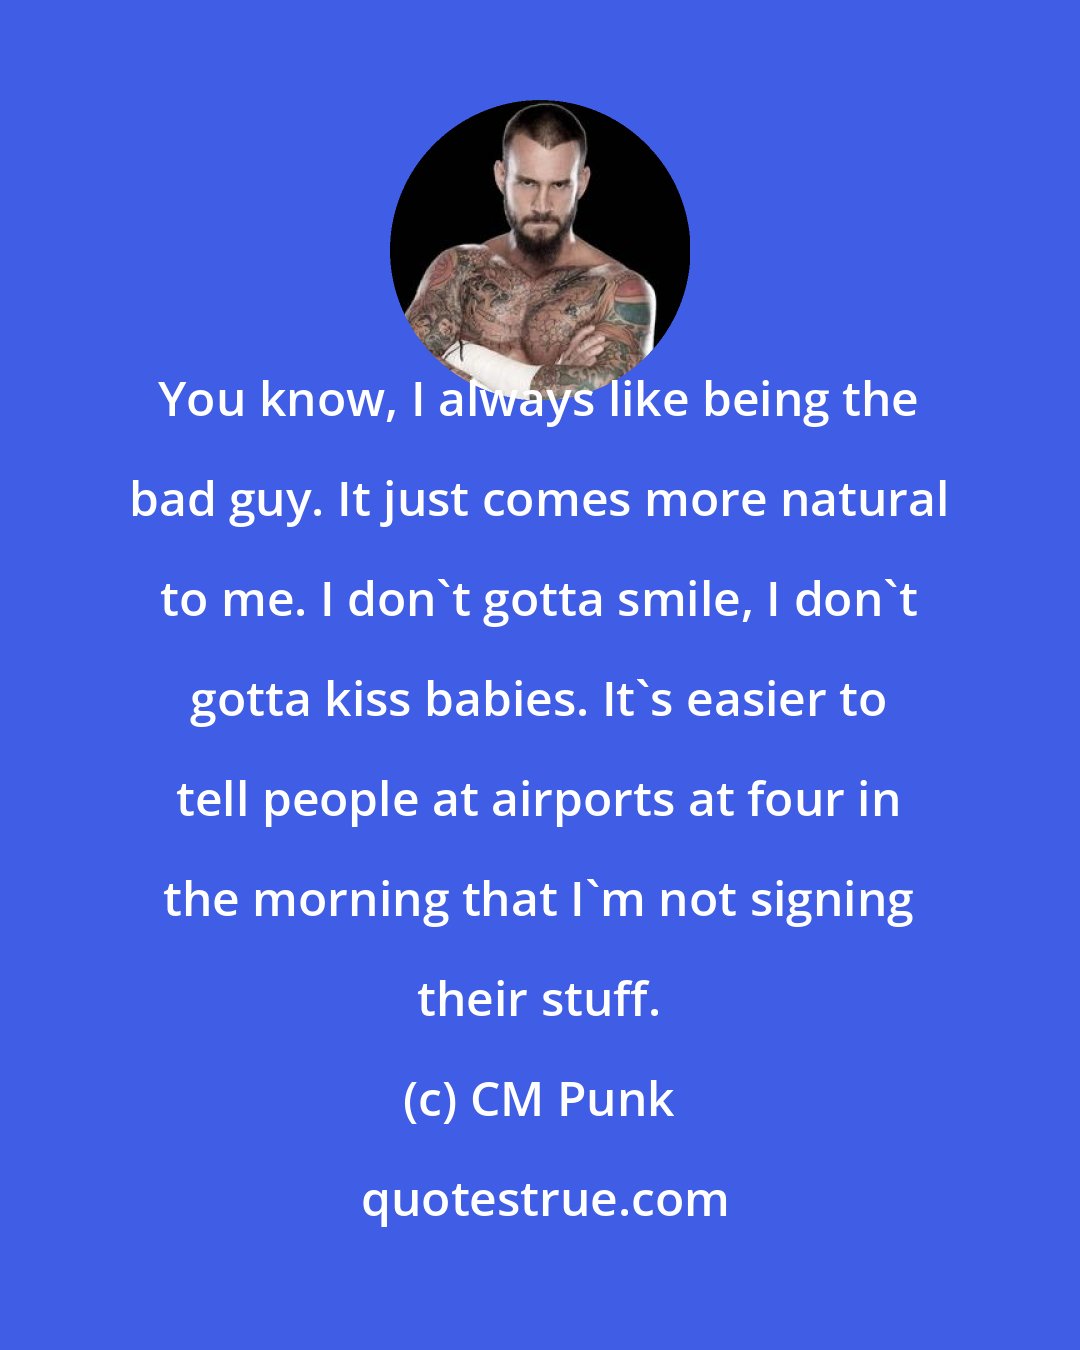 CM Punk: You know, I always like being the bad guy. It just comes more natural to me. I don't gotta smile, I don't gotta kiss babies. It's easier to tell people at airports at four in the morning that I'm not signing their stuff.